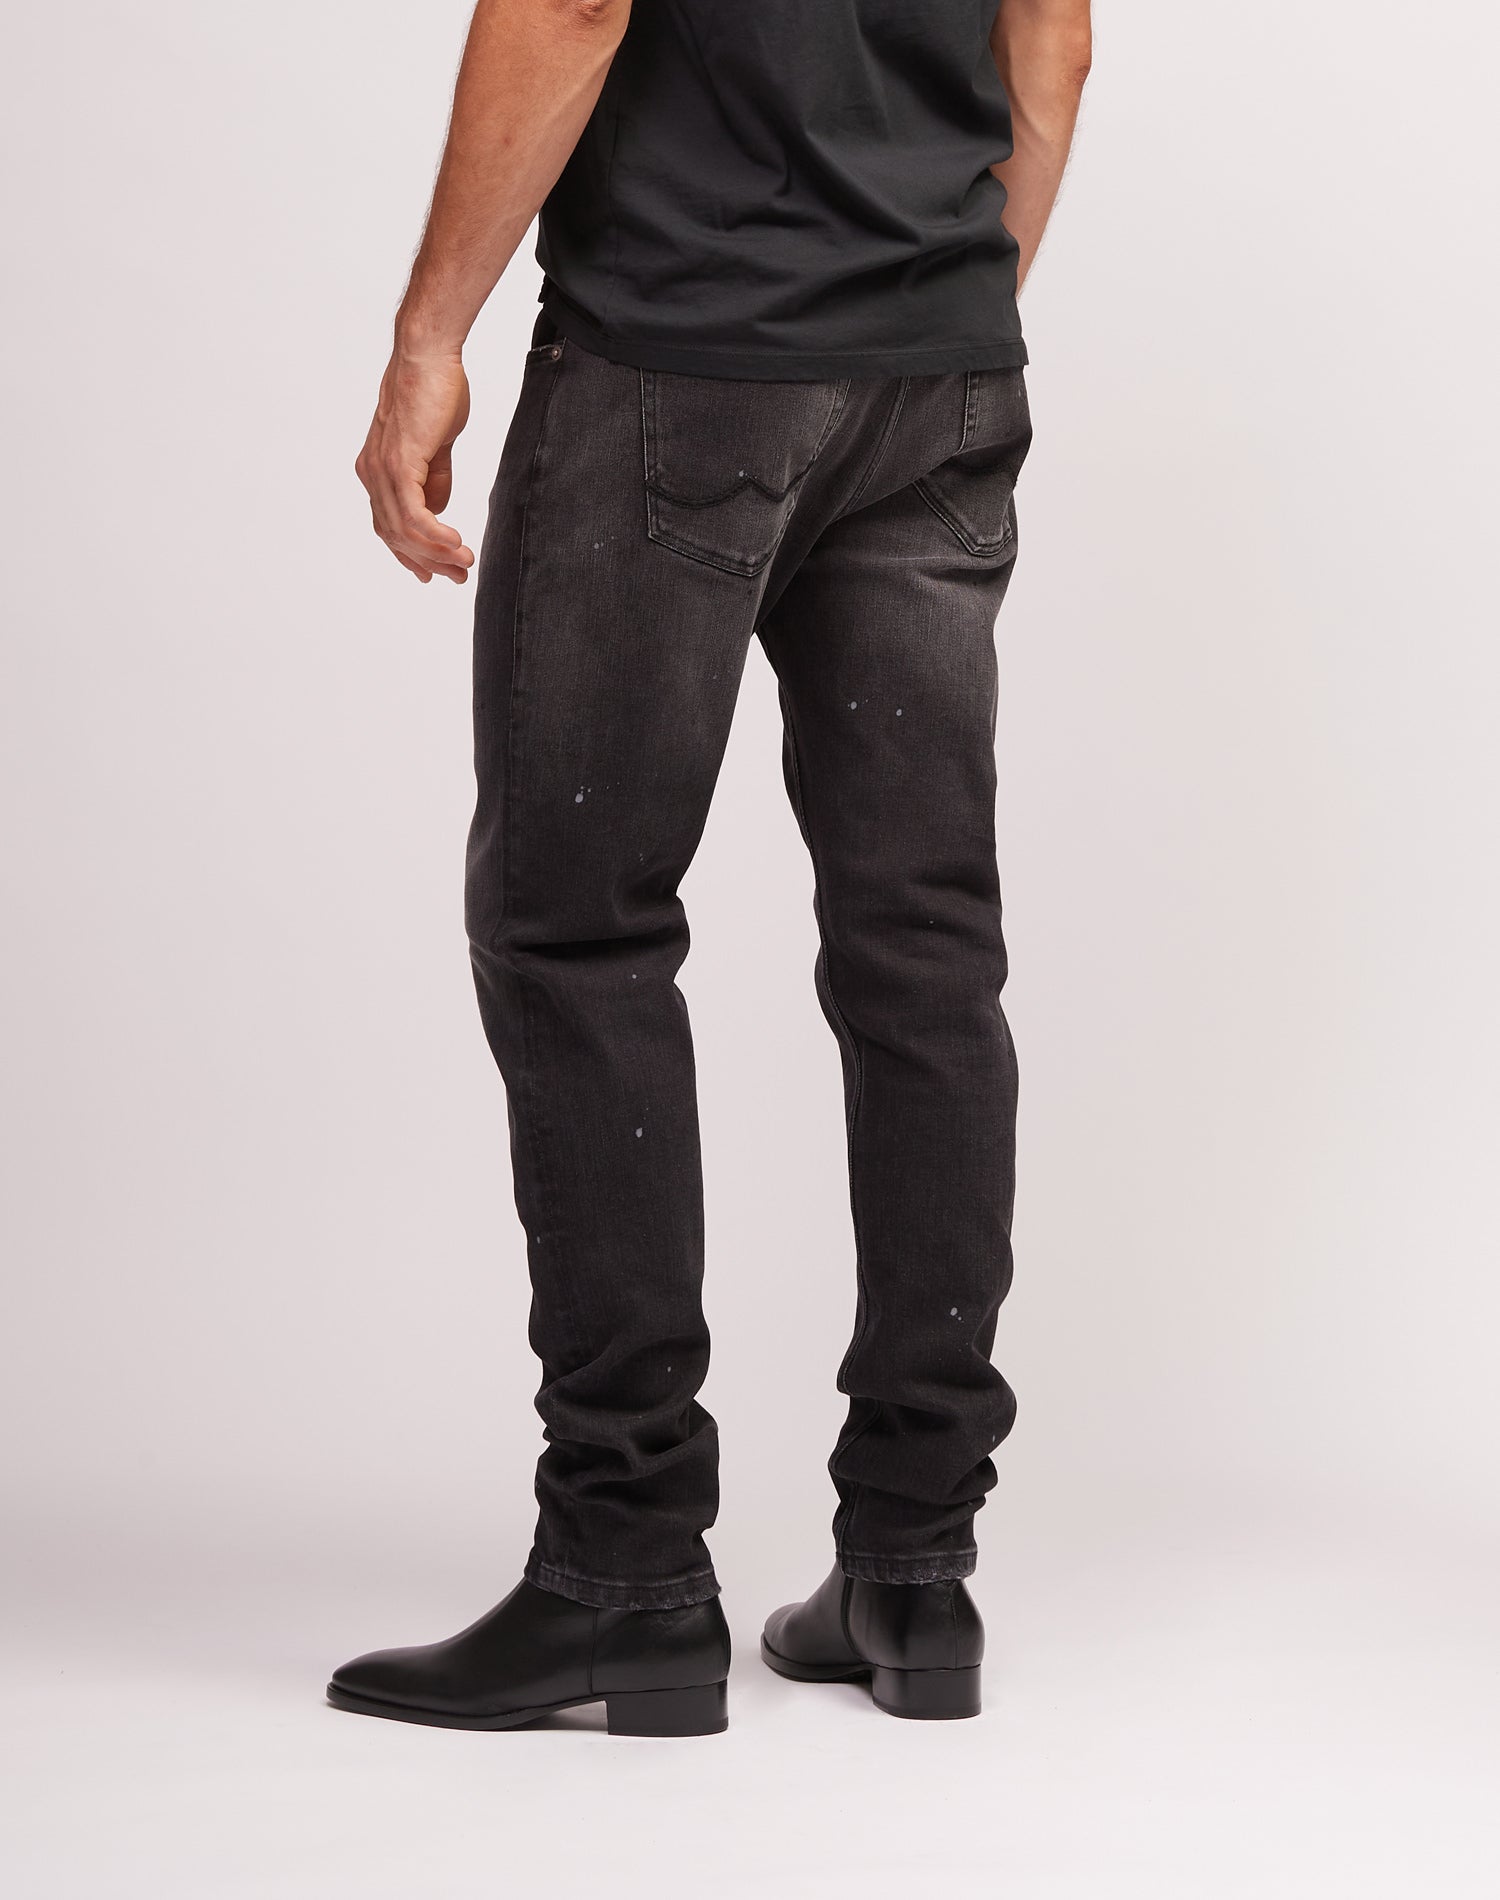 SLIM VINTAGE BLACK Slim fit black Denim, light stone washed, five pockets jeans with hidden buttons. Logo detail on the back. 100% cotton. Made in Italy. HTC LOS ANGELES